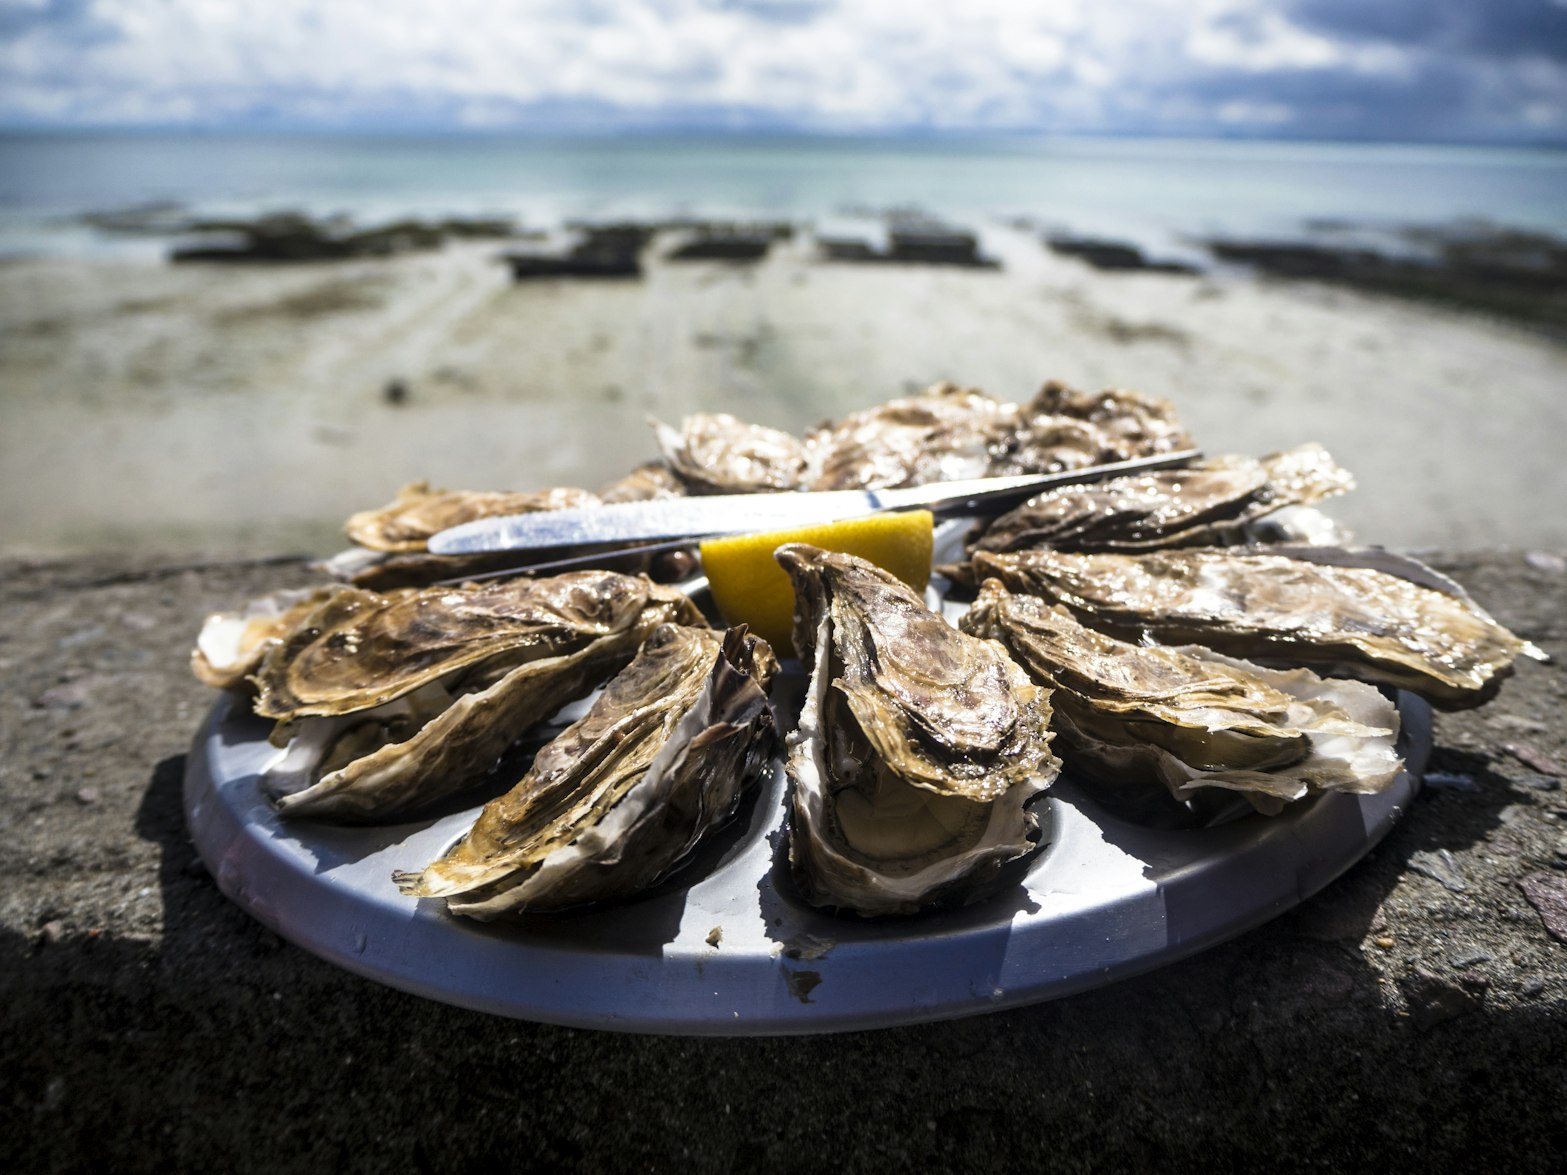 Gulf Oysters Are Dying, Putting a Southern Tradition at Risk